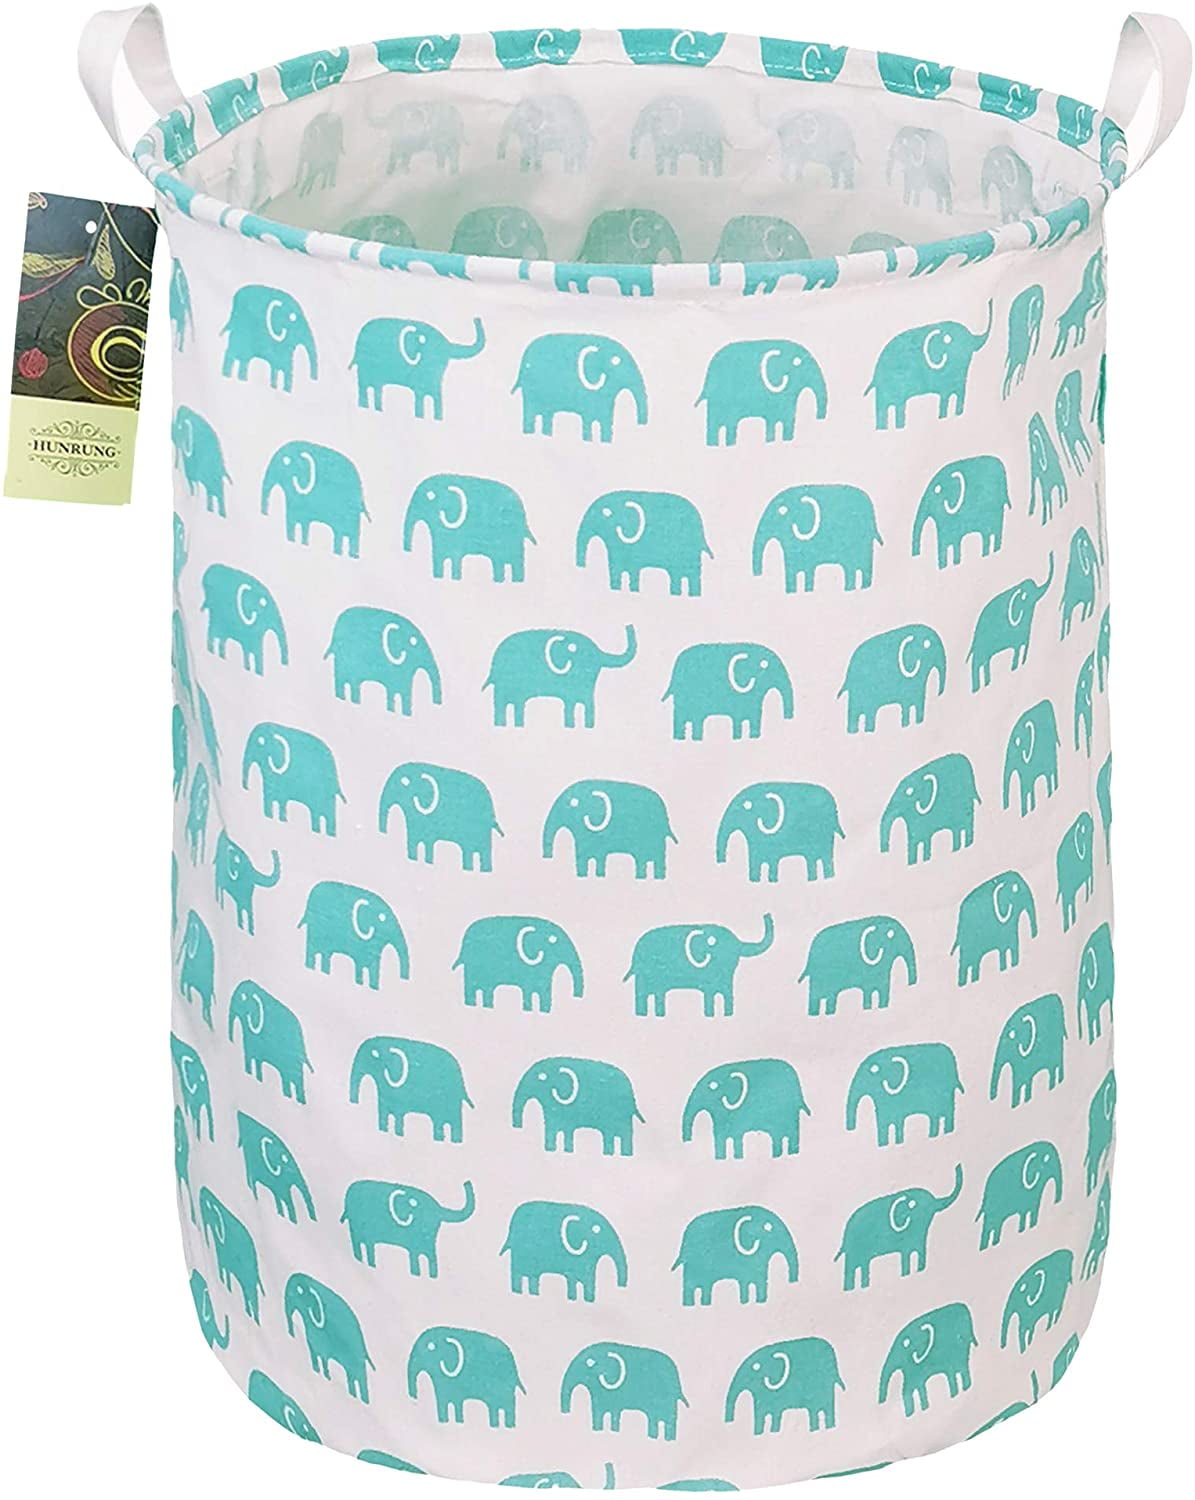 CLOCOR Large Storage Basket,Canvas Fabric Waterproof Storage Bin Collapsible Laundry Hamper Basket for Home,Kids,Nuesery,Toy Organizer Elephants 